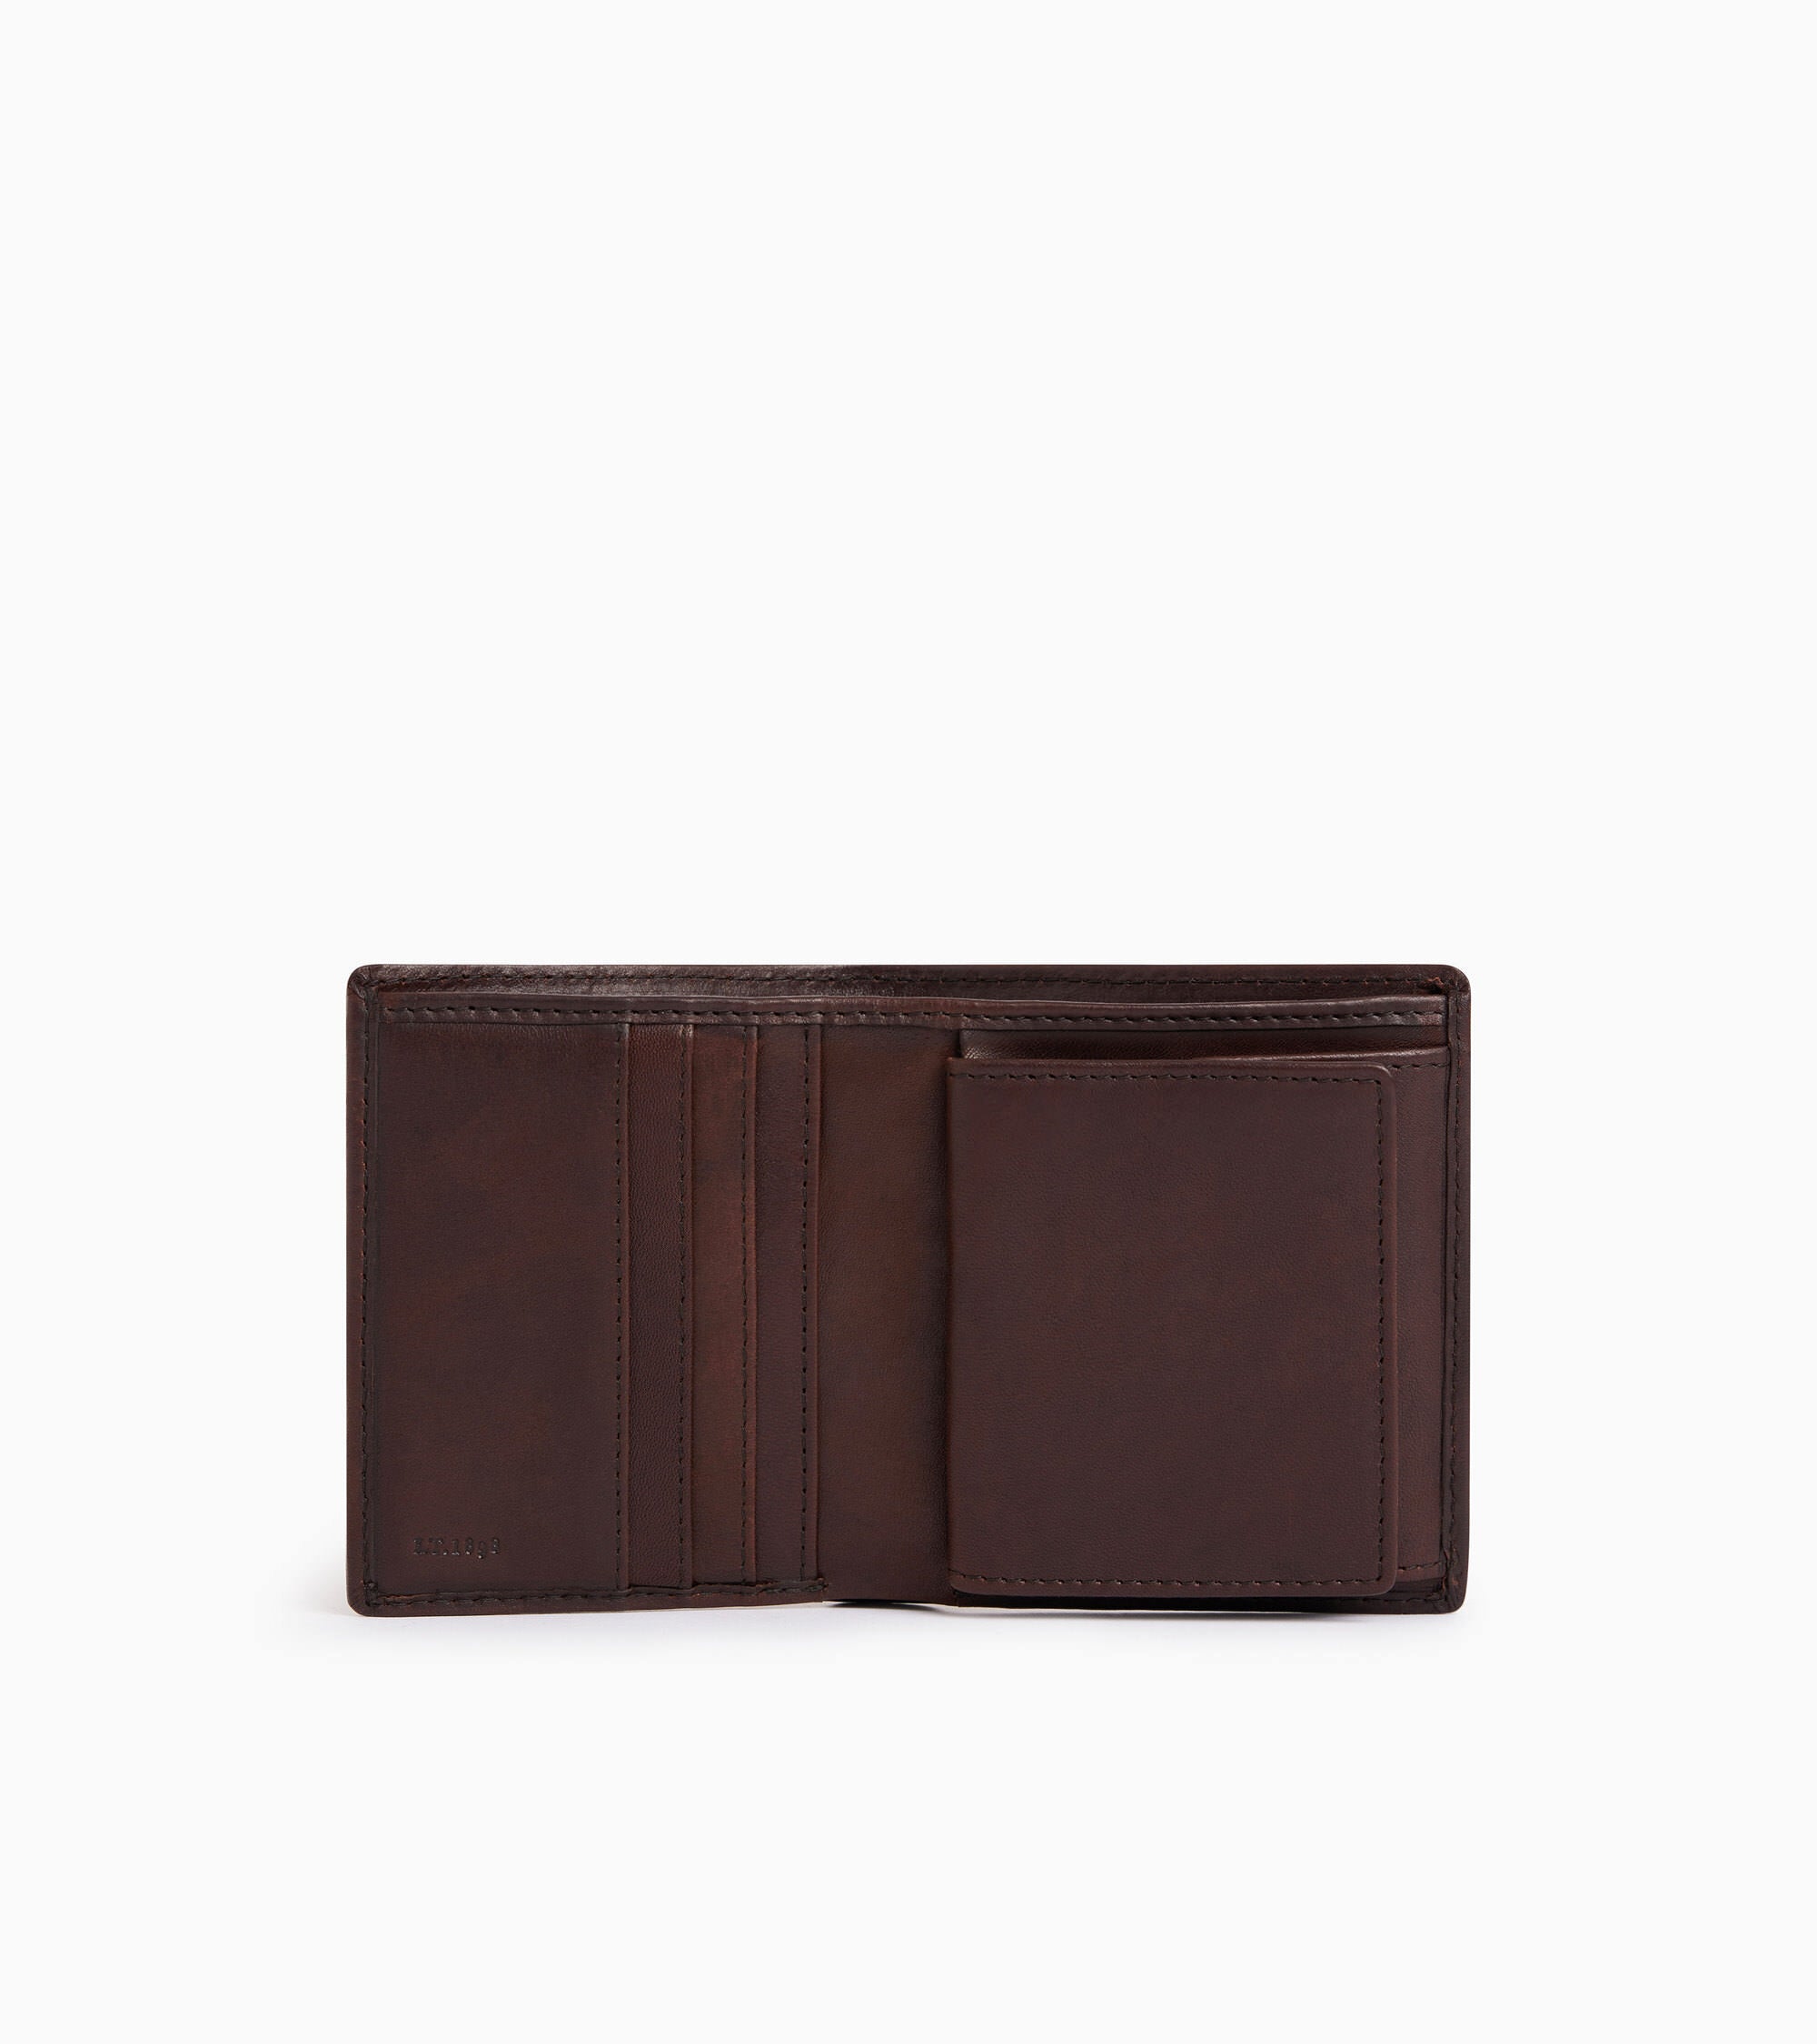 Gary coin purse with billfold in oiled leather